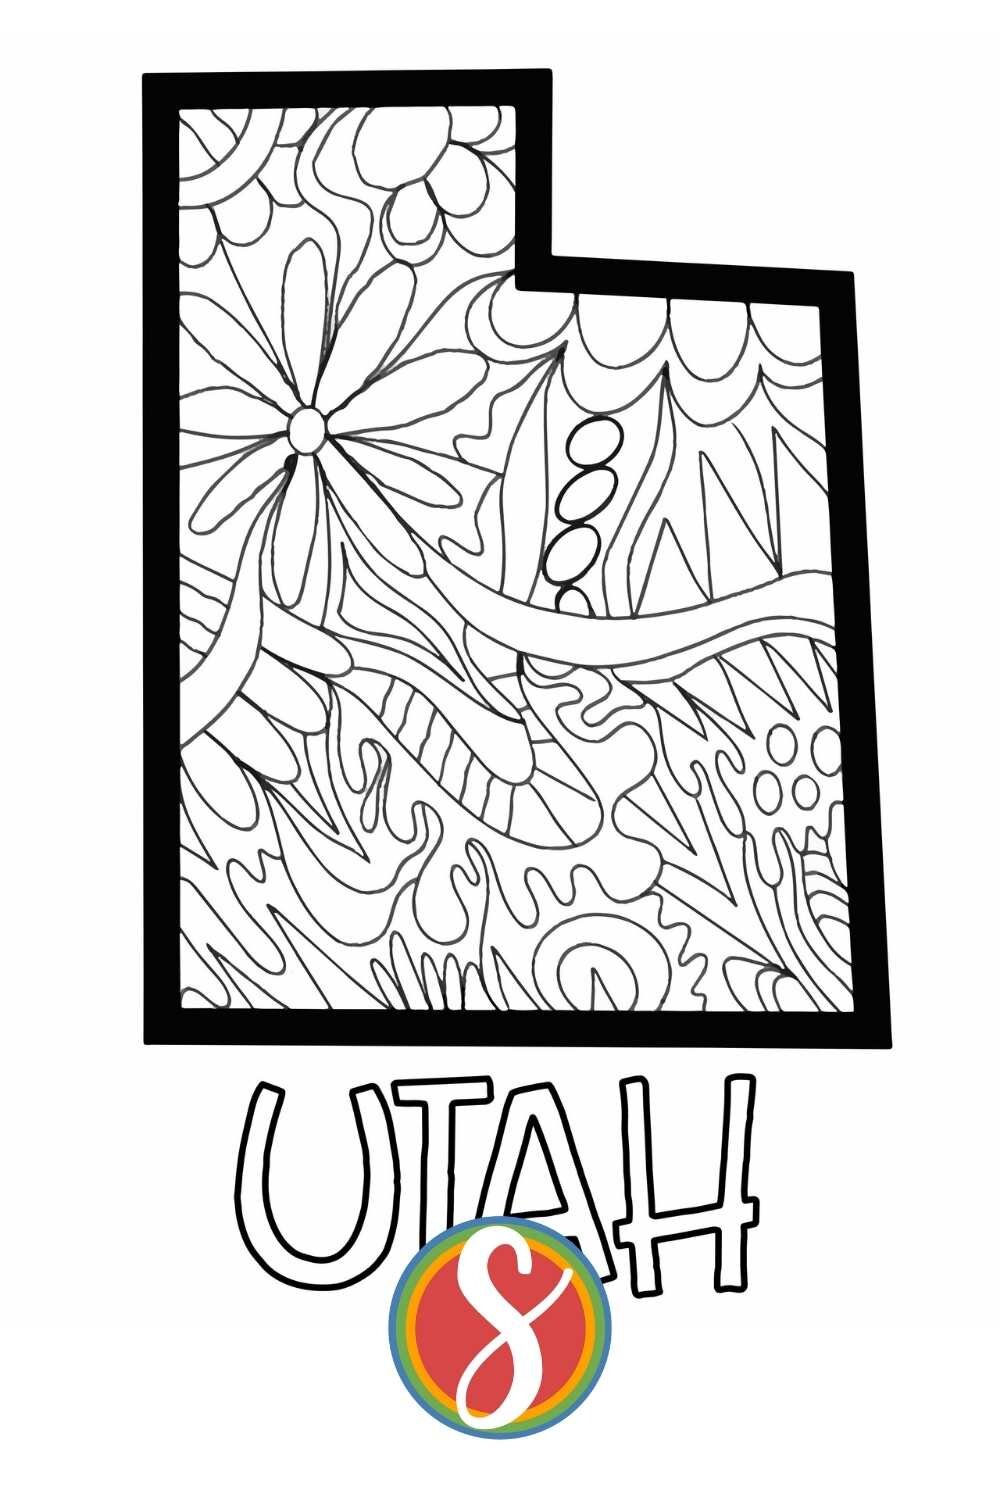 Free printable Utah  coloring page from Stevie Doodles - print and color 4 free Utah themed activity pages in this post from Stevie Doodles and find your state too!